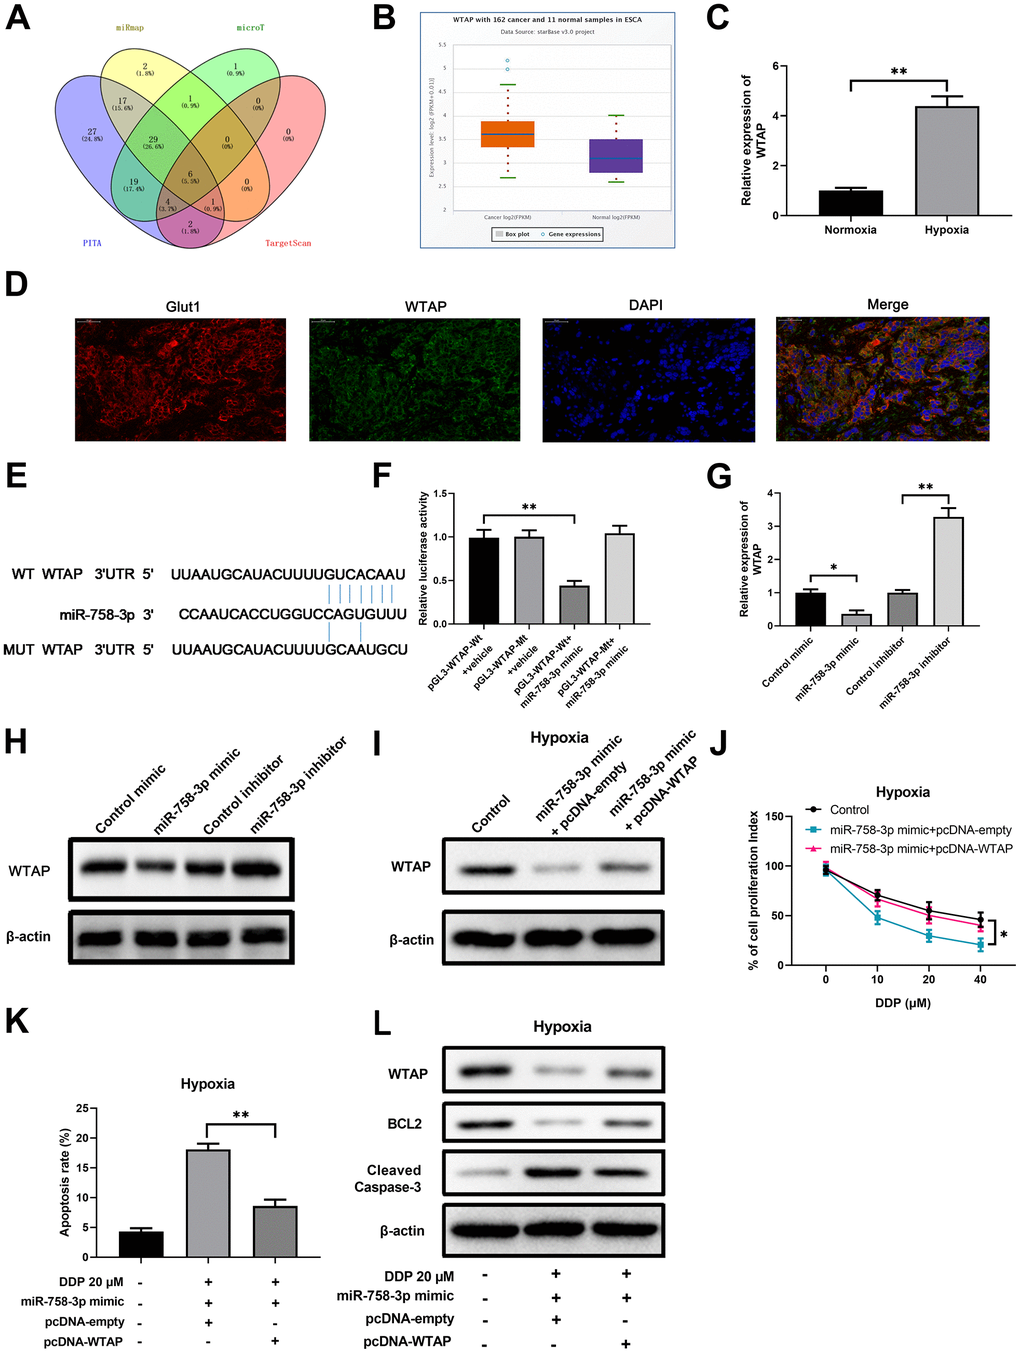 WTAP is a downstream target of miR-758-3p in EC cells, and is required for hypoxia-mediated resistance to DDP. (A) Prediction with multi-database identified 14 possible target mRNAs of miR-758-3p. (B) Higher expression of WTAP in esophageal cancer cells was validated using the starBase. n=162 for the cancer group; n=11 for the control group. (C) The WTAP mRNA expression levels in ECA-109 cells under the hypoxic and normoxic conditions were determined by RT-qPCR. (D) Expression of WTAP and Glut1 in EC tissue determined using immunofluorescence. (E) Sequence comparison of miR-785-3p and wild type or mutated 3’UTR of WTAP. (F) Dual luciferase assay validated the interaction between miR-758-3p and WTAP in ECA-109 cells. (G, H) qPCR assays and western blot assays were used to determine the mRNA levels (G) and protein levels (H) of WTAP in ECA-109 cells after transfection of miR-758-3p mimic/inhibitor or the corresponding controls. (I) Western blot results show the protein levels of WTAP in hypoxic ECA-109 cells with the indicated treatments. (J) Ectopic WTAP expression reversed the growth inhibitory effect of DDP in combination with miR-758-3p mimic under hypoxic condition. The proliferation of hypoxic ECA-109 cells after the indicated treatment was evaluated by CCK-8 assays. (K, L) Ectopic WTAP expression reversed the apoptosis-promoting effect of DDP in combination with miR-758-3p mimic under hypoxic condition. The apoptosis rates (K) and western blot results on WTAP/BCL2/cleaved-caspase-3 levels (L) are shown. Representative band images from 5 independent experiments with similar results are shown in J. n=5 for each group.